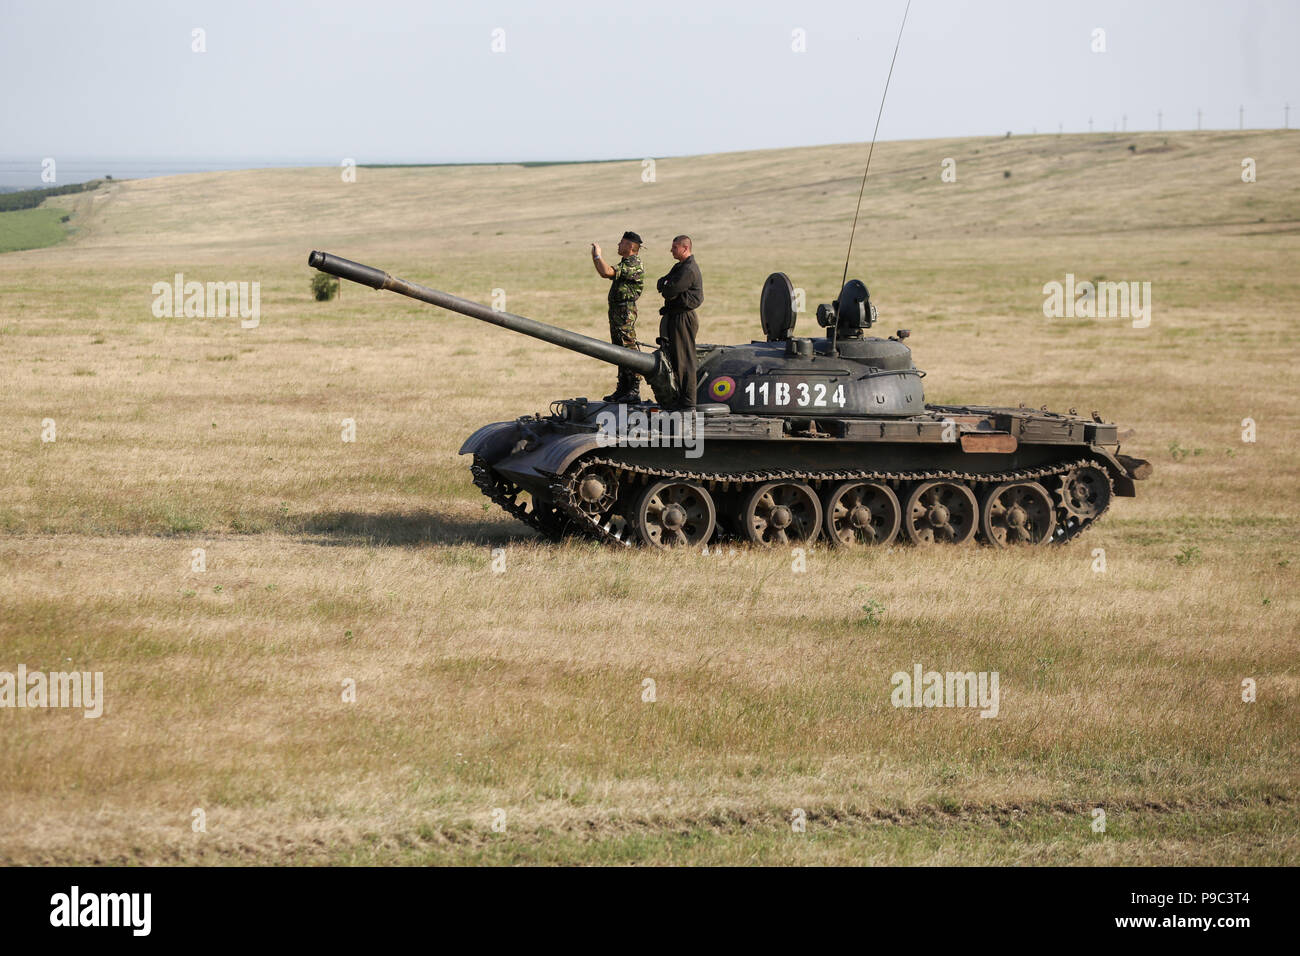 BABADAG, ROMANIA - JUNE 23, 2018: Two Romanian soldiers stay on a Russian made T-55 light tank, during a drill Stock Photo